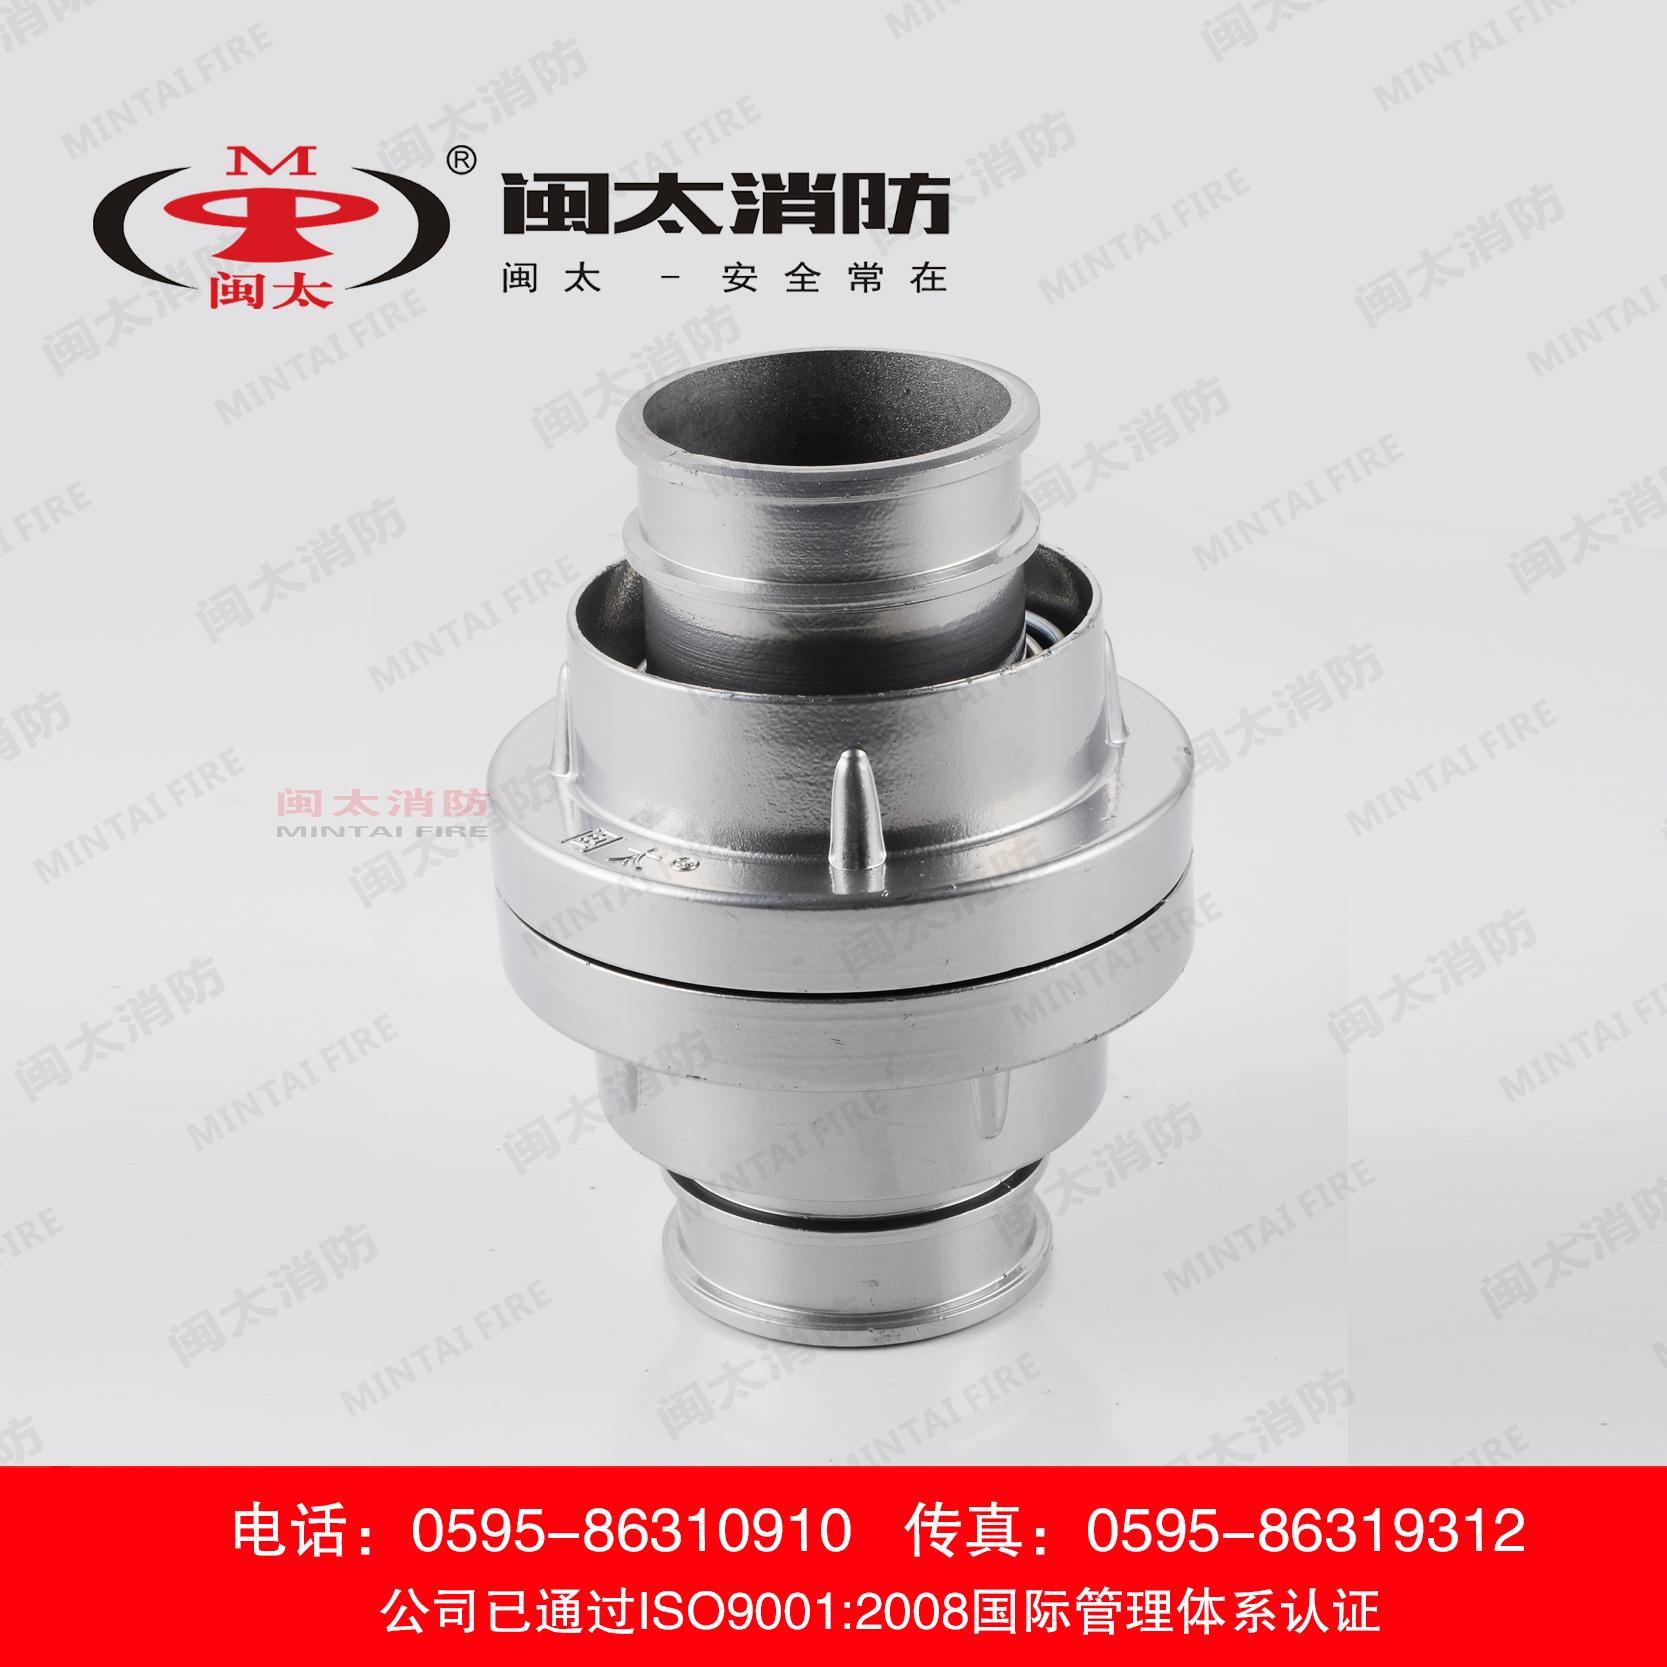 KD50 65 FIRE CONNECTION BUTTON FIRE INTERFACE MINTOO FIRE EQUIPMENT FIRE HYDRANTS FIRE HYDRANT FIRE EQUIPMENT INTERIOR ALUMINUM PRODUCTS